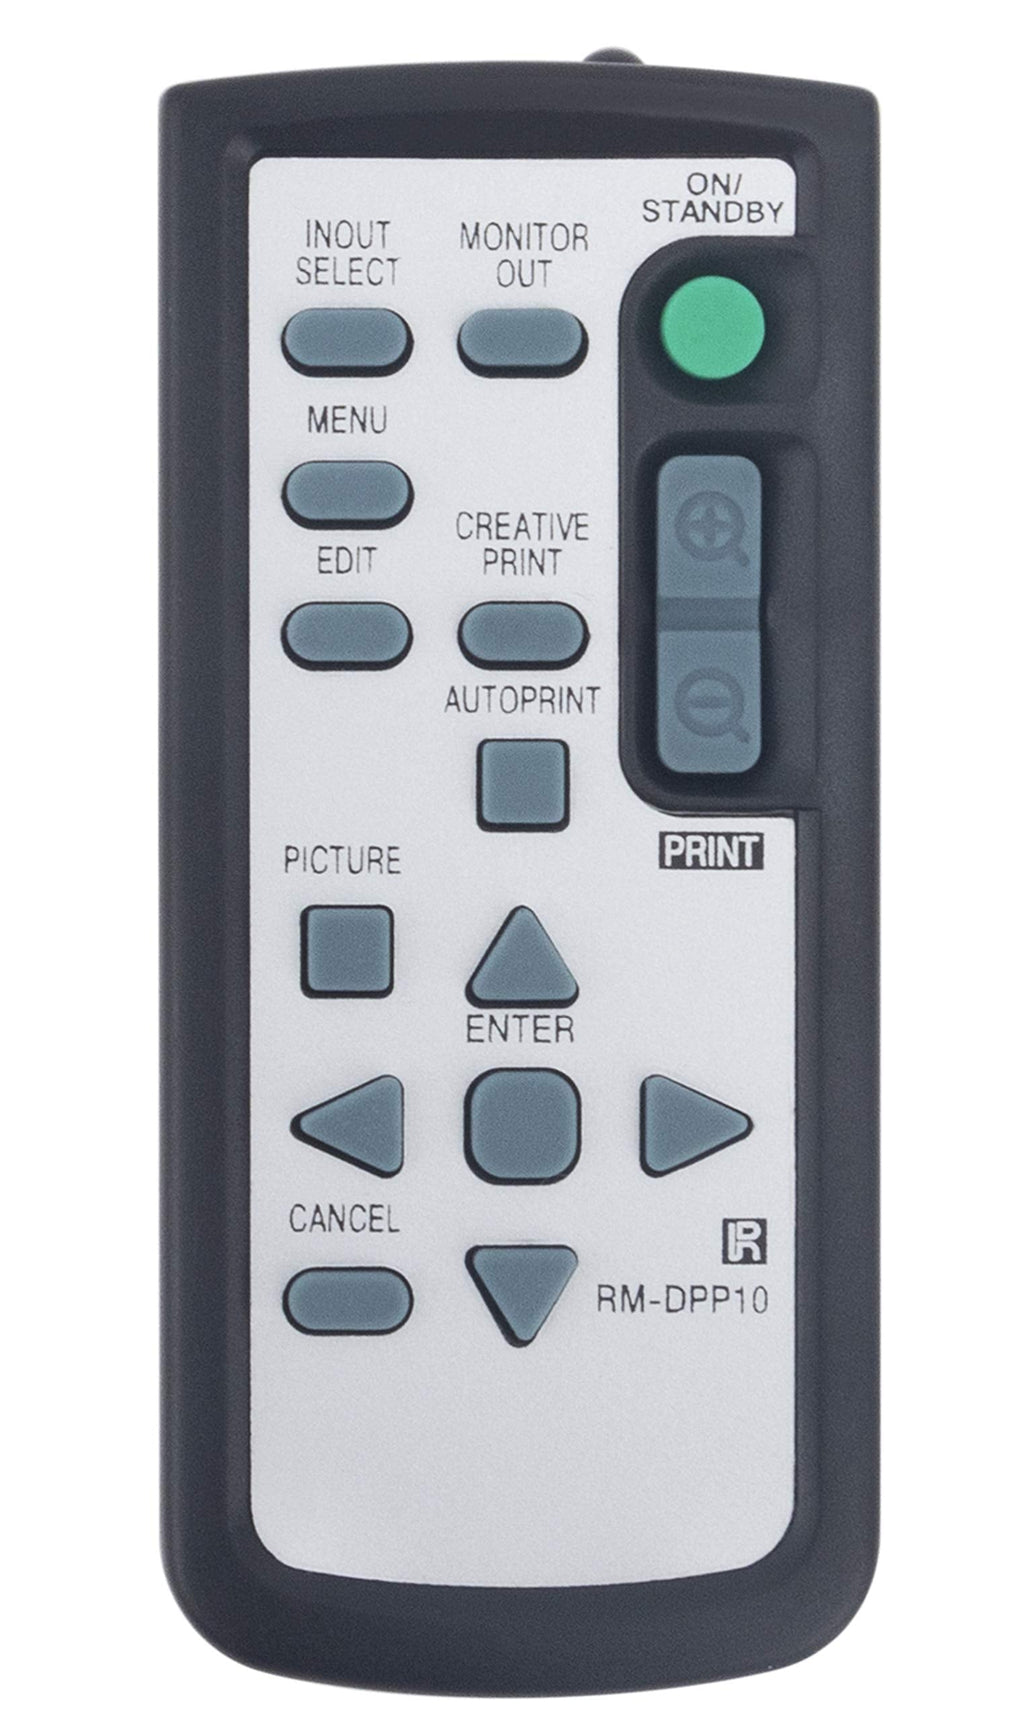 RM-DPP10 Replaced Remote fit for Sony Picture Station Digital Photo Printer DPP-FP50